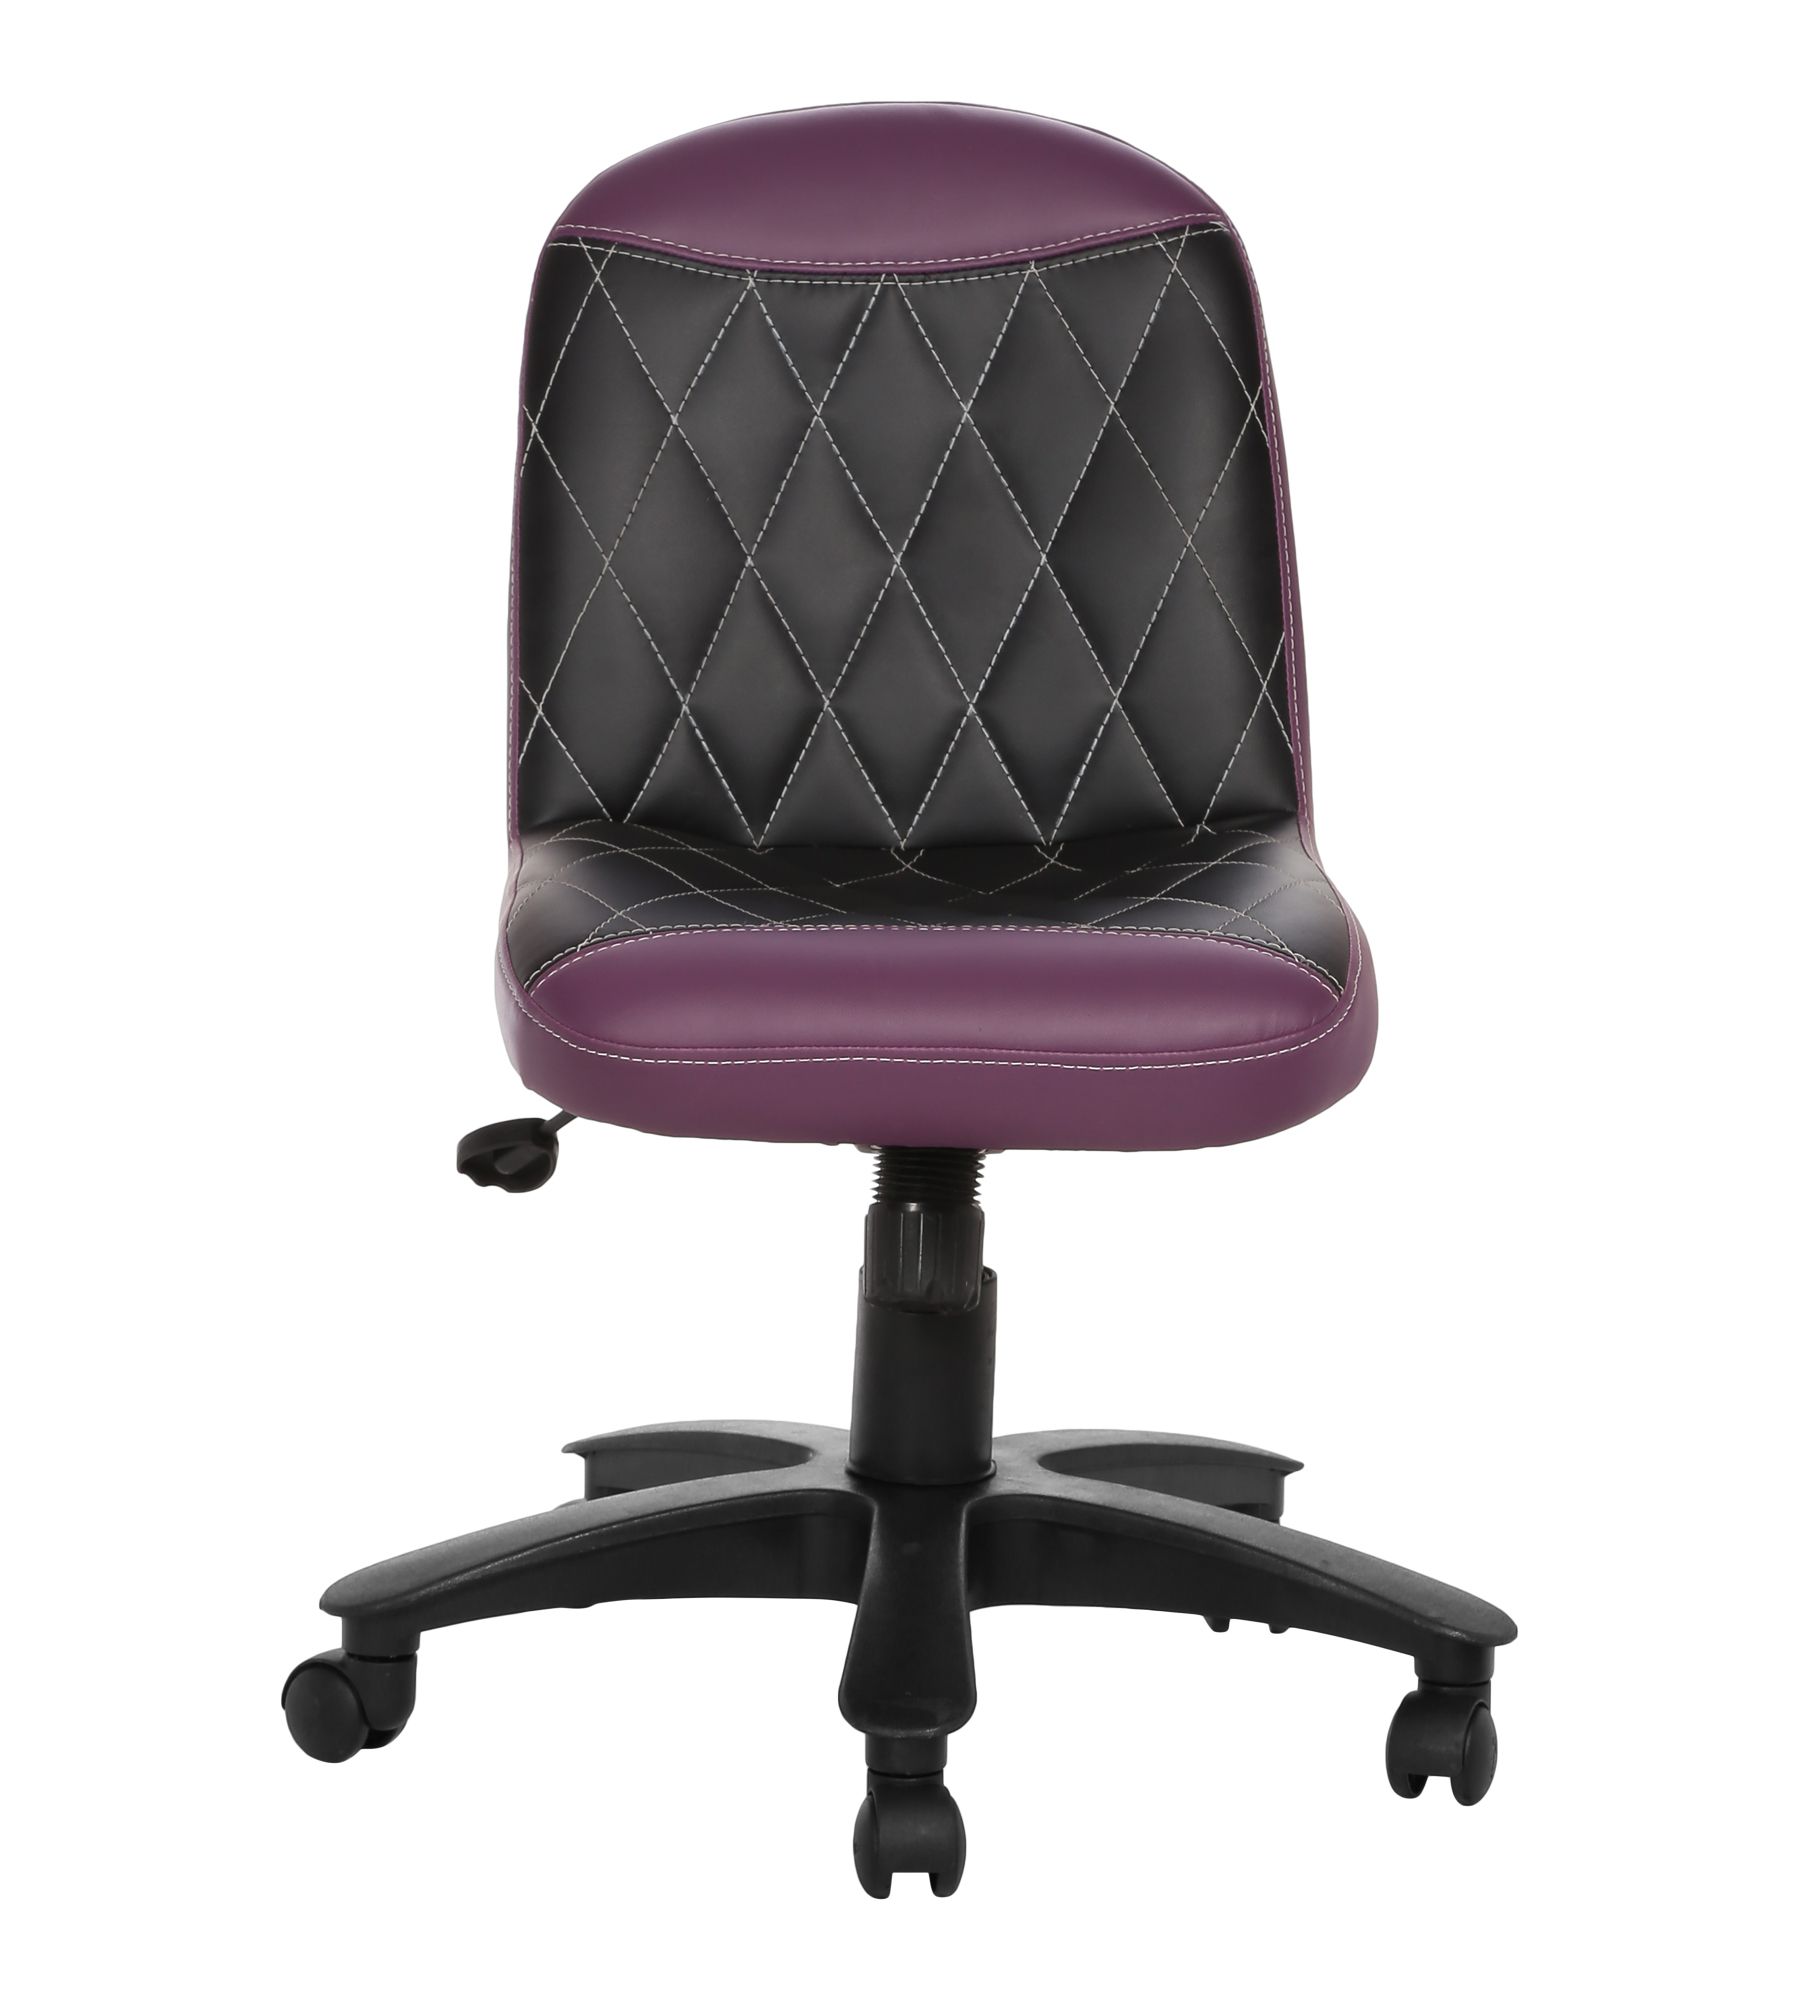 LOW BACK OFFICE CHAIR PURPLE AND BLACK Buy LOW BACK